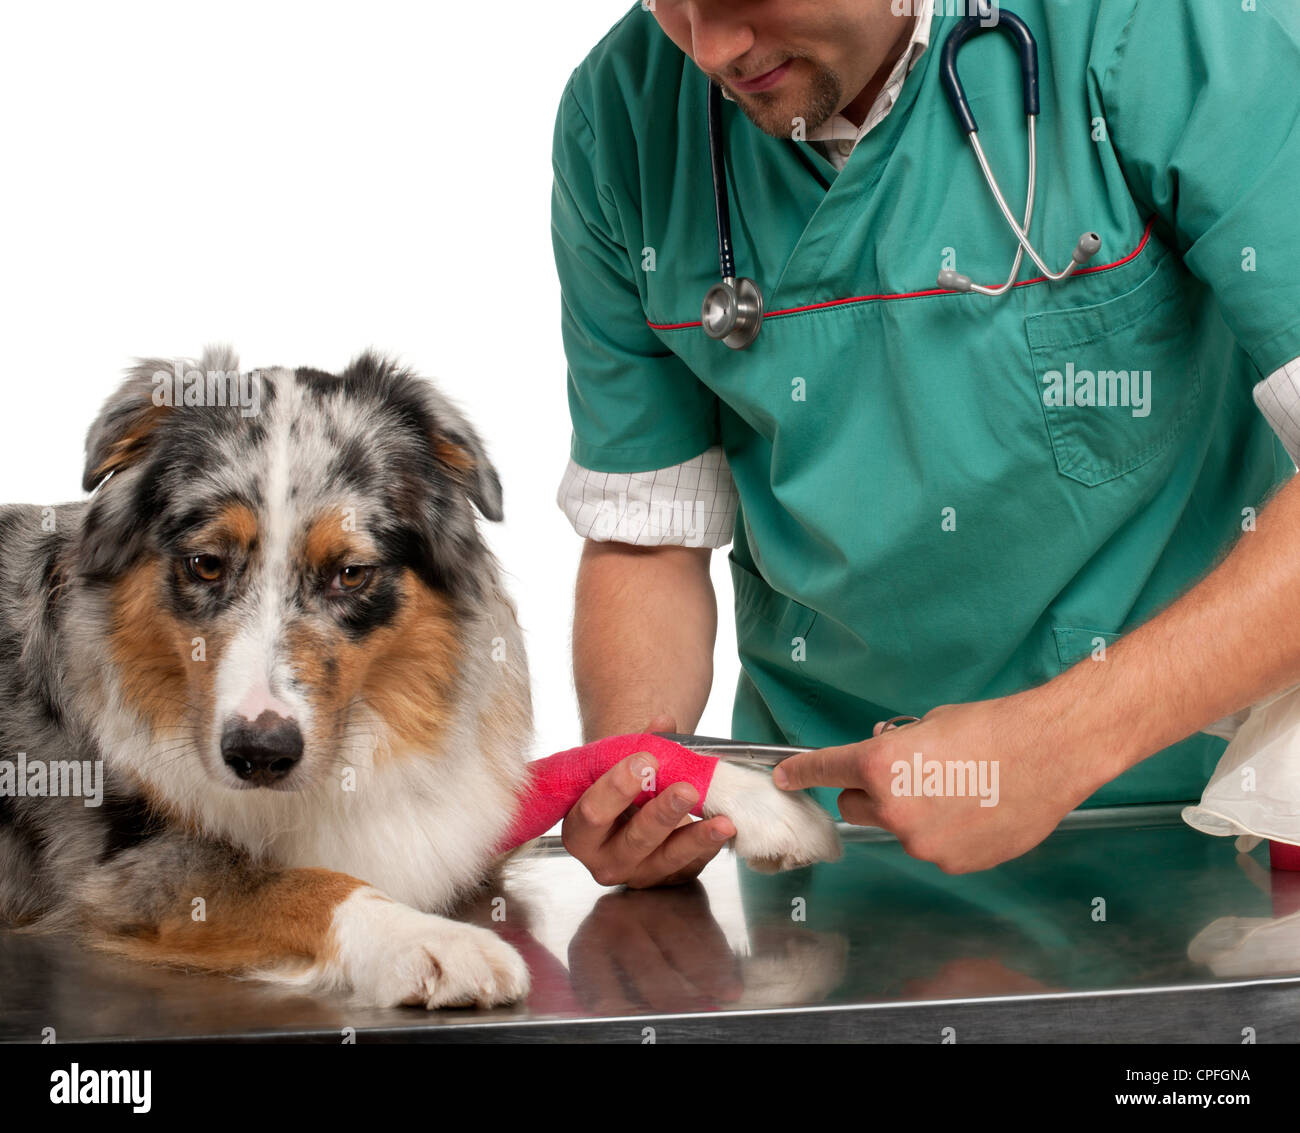 Vet wrapping a bandage around an Australian shepherd's paw in front of white background Stock Photo